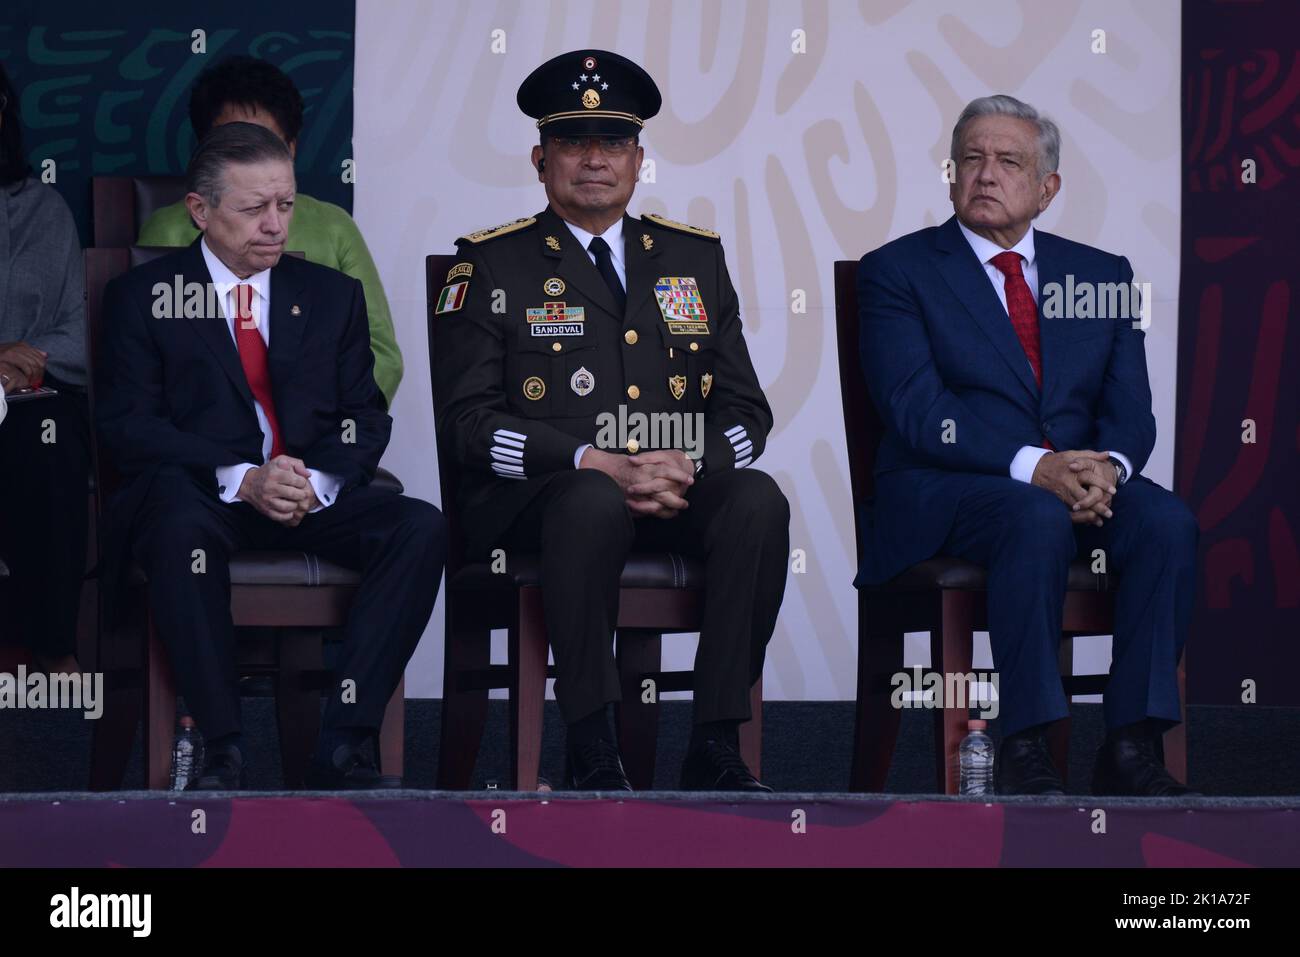 Mexico City, Mexico. 16th Sep, 2022. September 16, 2022, Mexico City, Mexico: Mexico’s President Andres Manuel Lopez Obrador accompanied by Secretary of National Defense (SEDENA) Luis Cresencio Sandoval and president of the Supreme Court of Justice Arturo Zaldivar during  the ceremony of the civic-military parade as part of the commemoration of the 212th Anniversary of the beginning of Mexico's Independence in the downtown. on September 16, 2022 in Mexico City, Mexico. (Photo by Carlos Tischler/ Eyepix Group) Credit: Eyepix Group/Alamy Live News Stock Photo